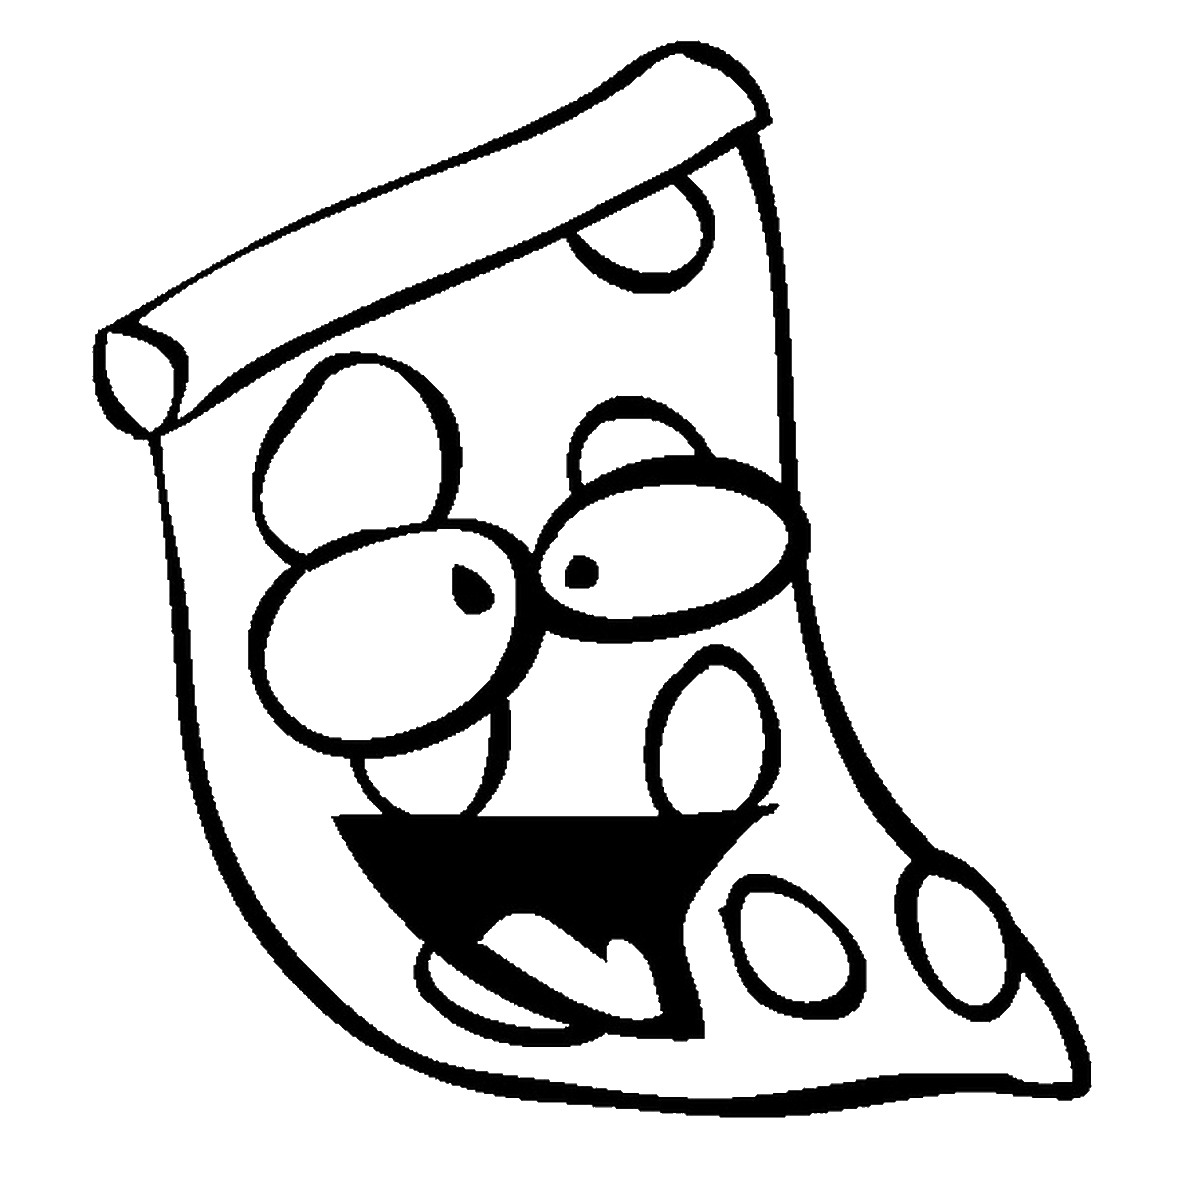 Pizza Coloring Pages Printable at GetColorings.com | Free printable